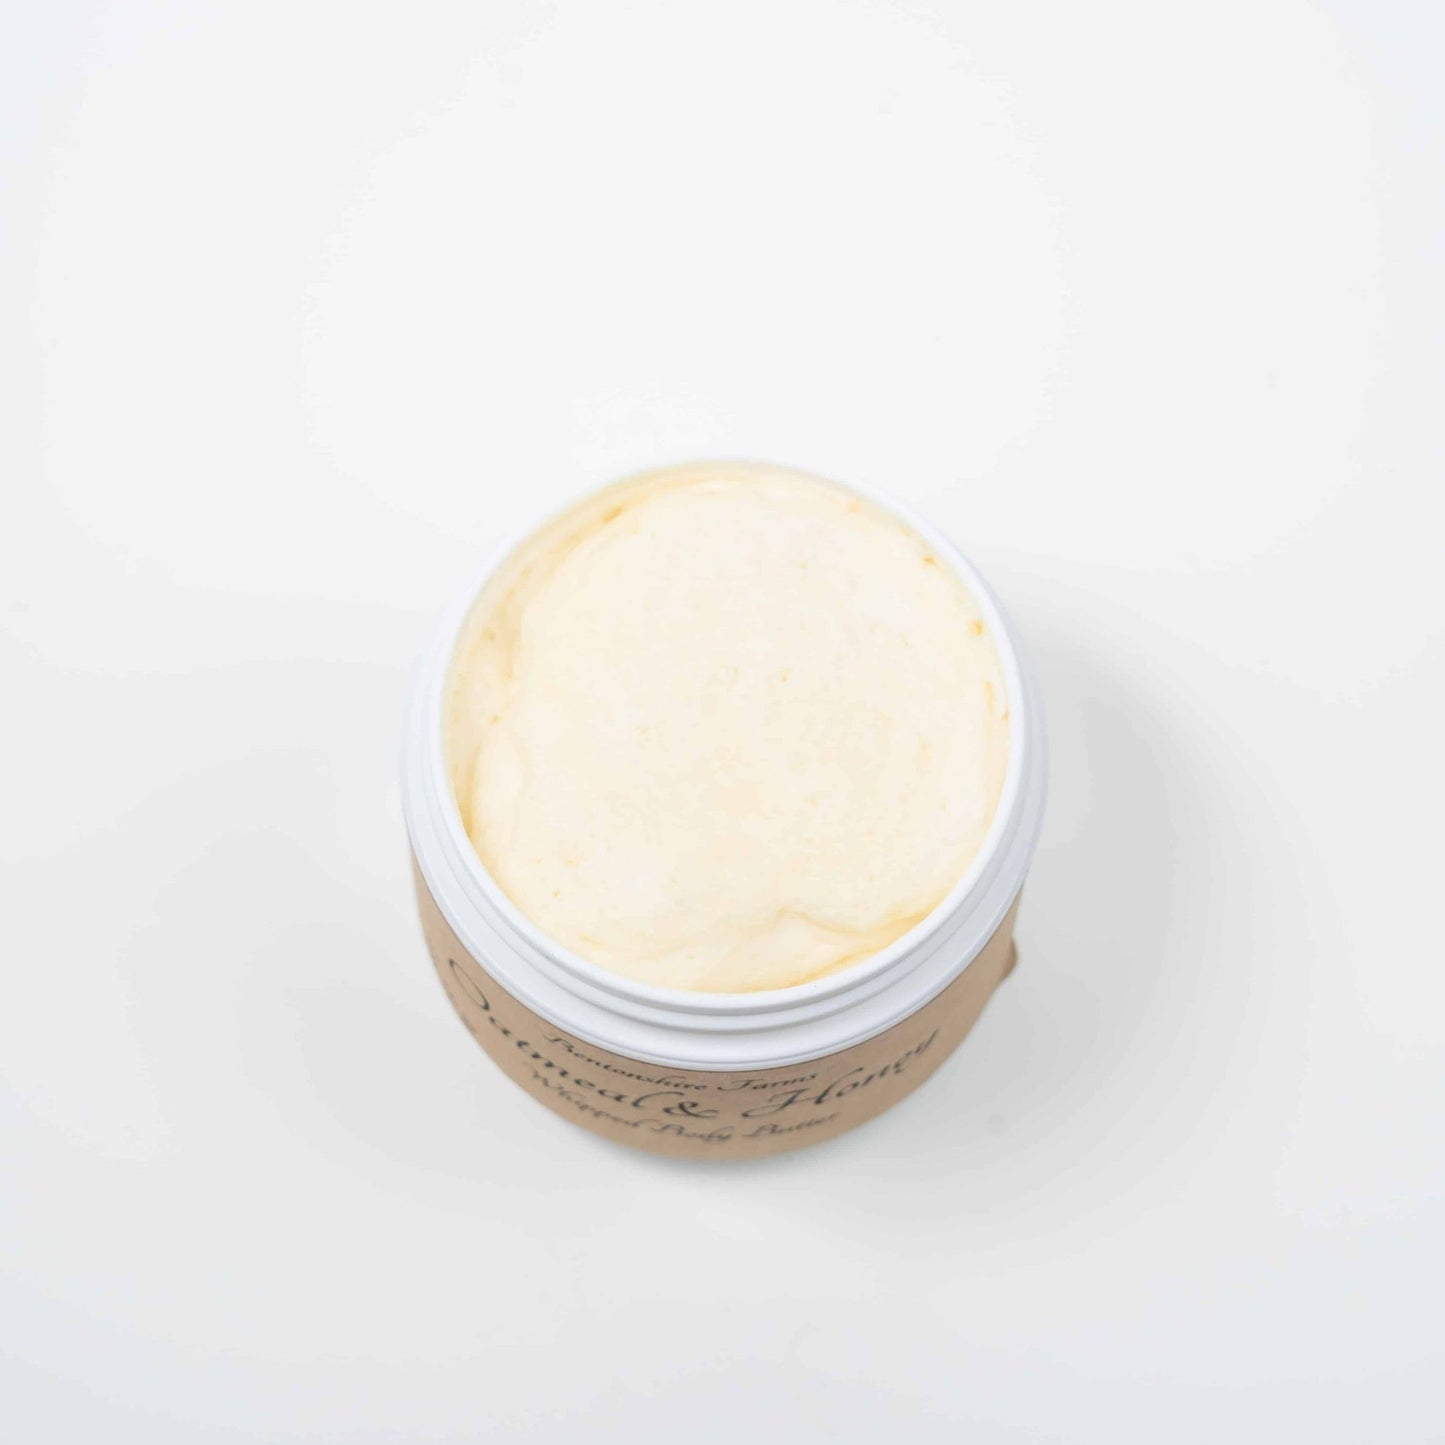 Oatmeal and Honey Body Butter